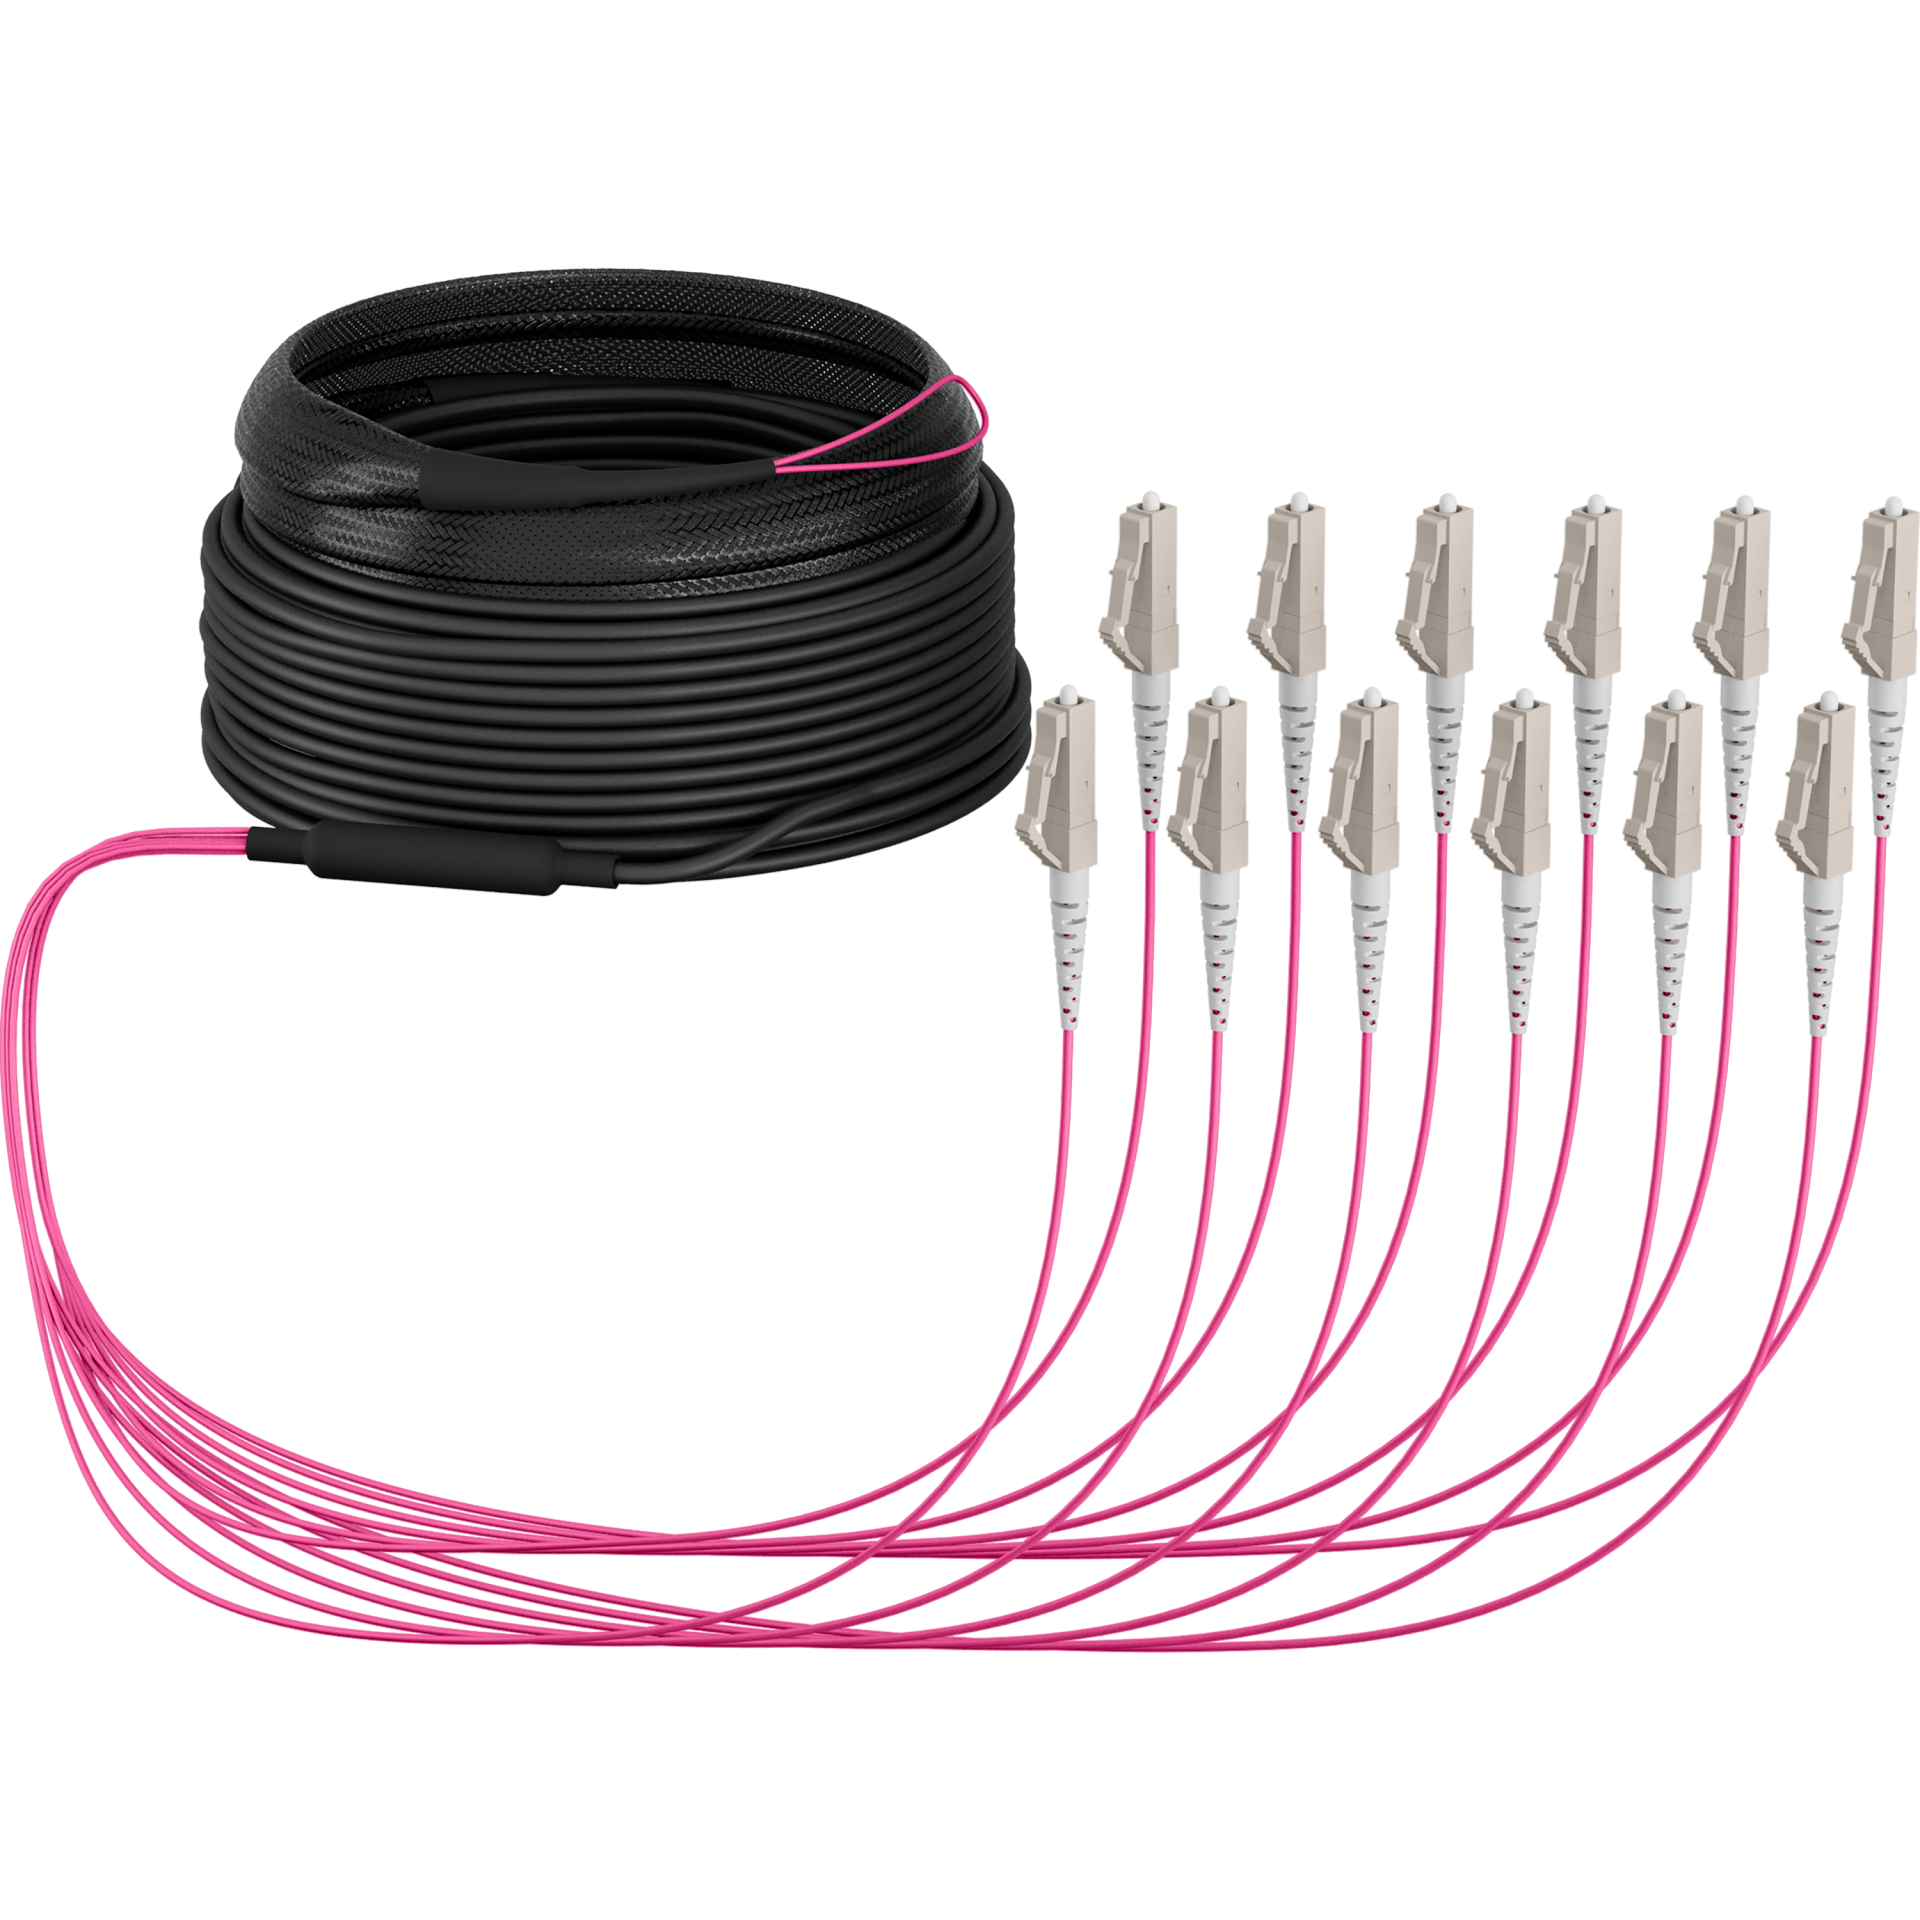 Trunkcable U-DQ(ZN)BH OM4 12G (1x12) LC-LC,40m Dca LSZH